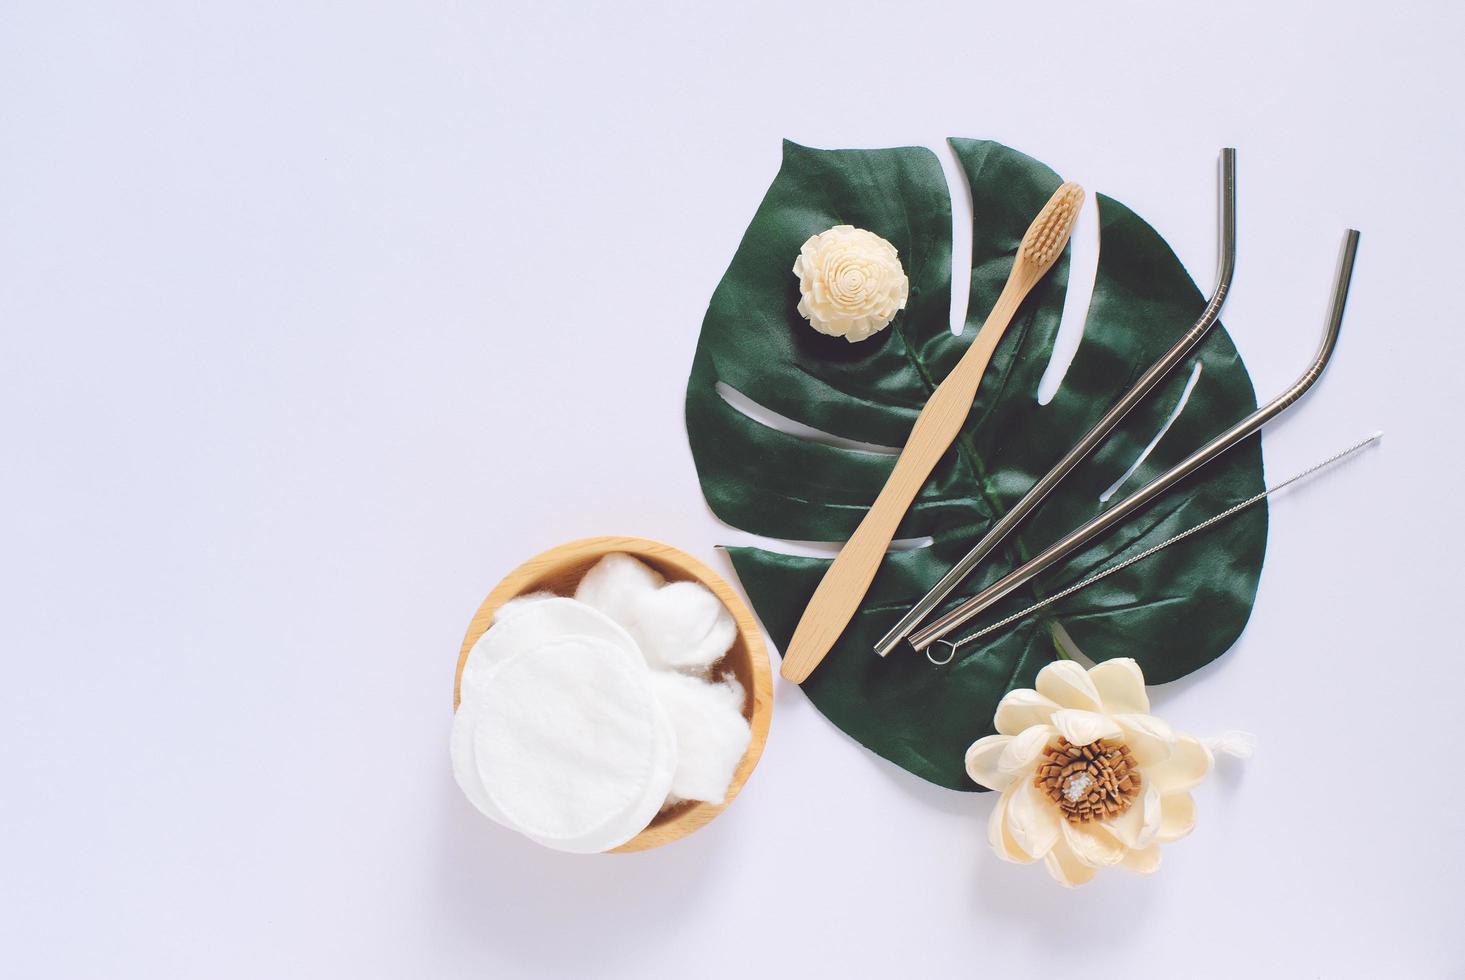 Flat lay of sustainable products, wooden spoon, stainless straw and natural cotton on green plant and white background with copy space, eco friendly and zero waste concept photo